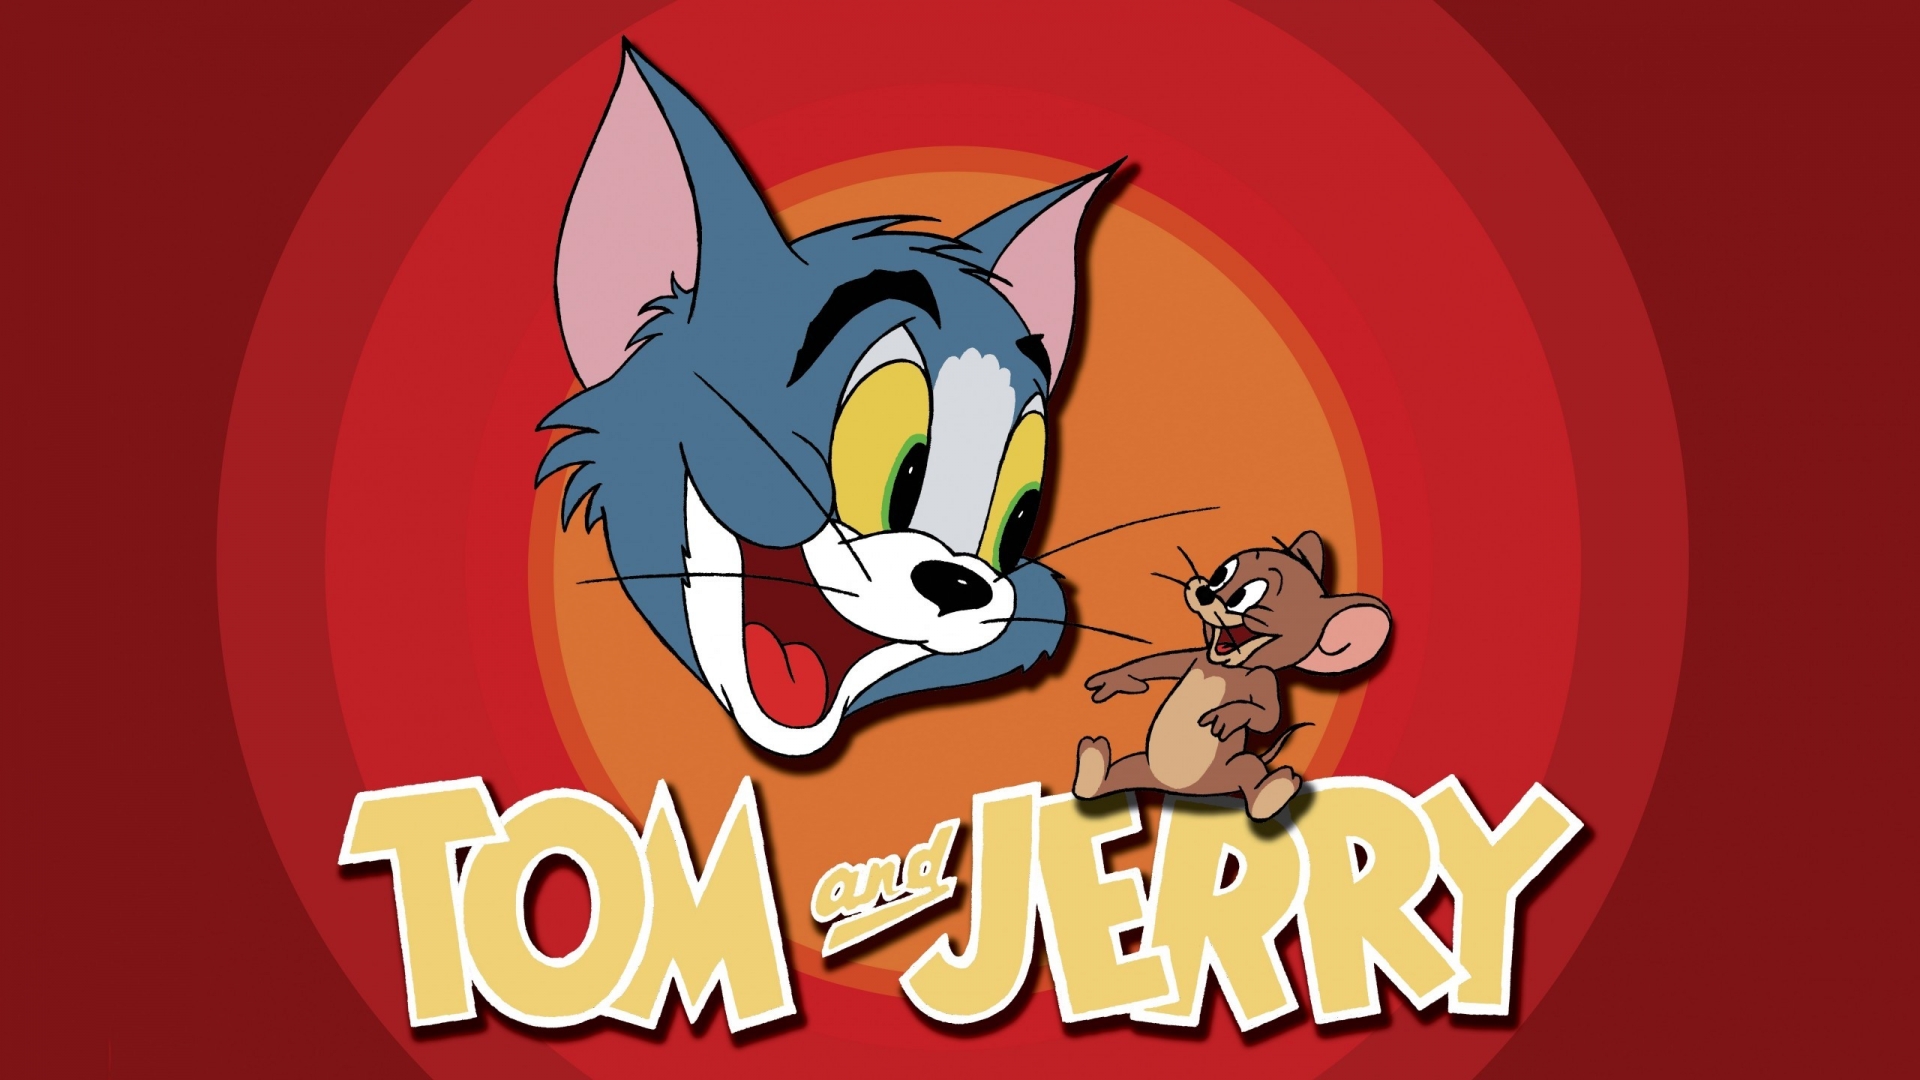 Tom and Jerry for 1920 x 1080 HDTV 1080p resolution